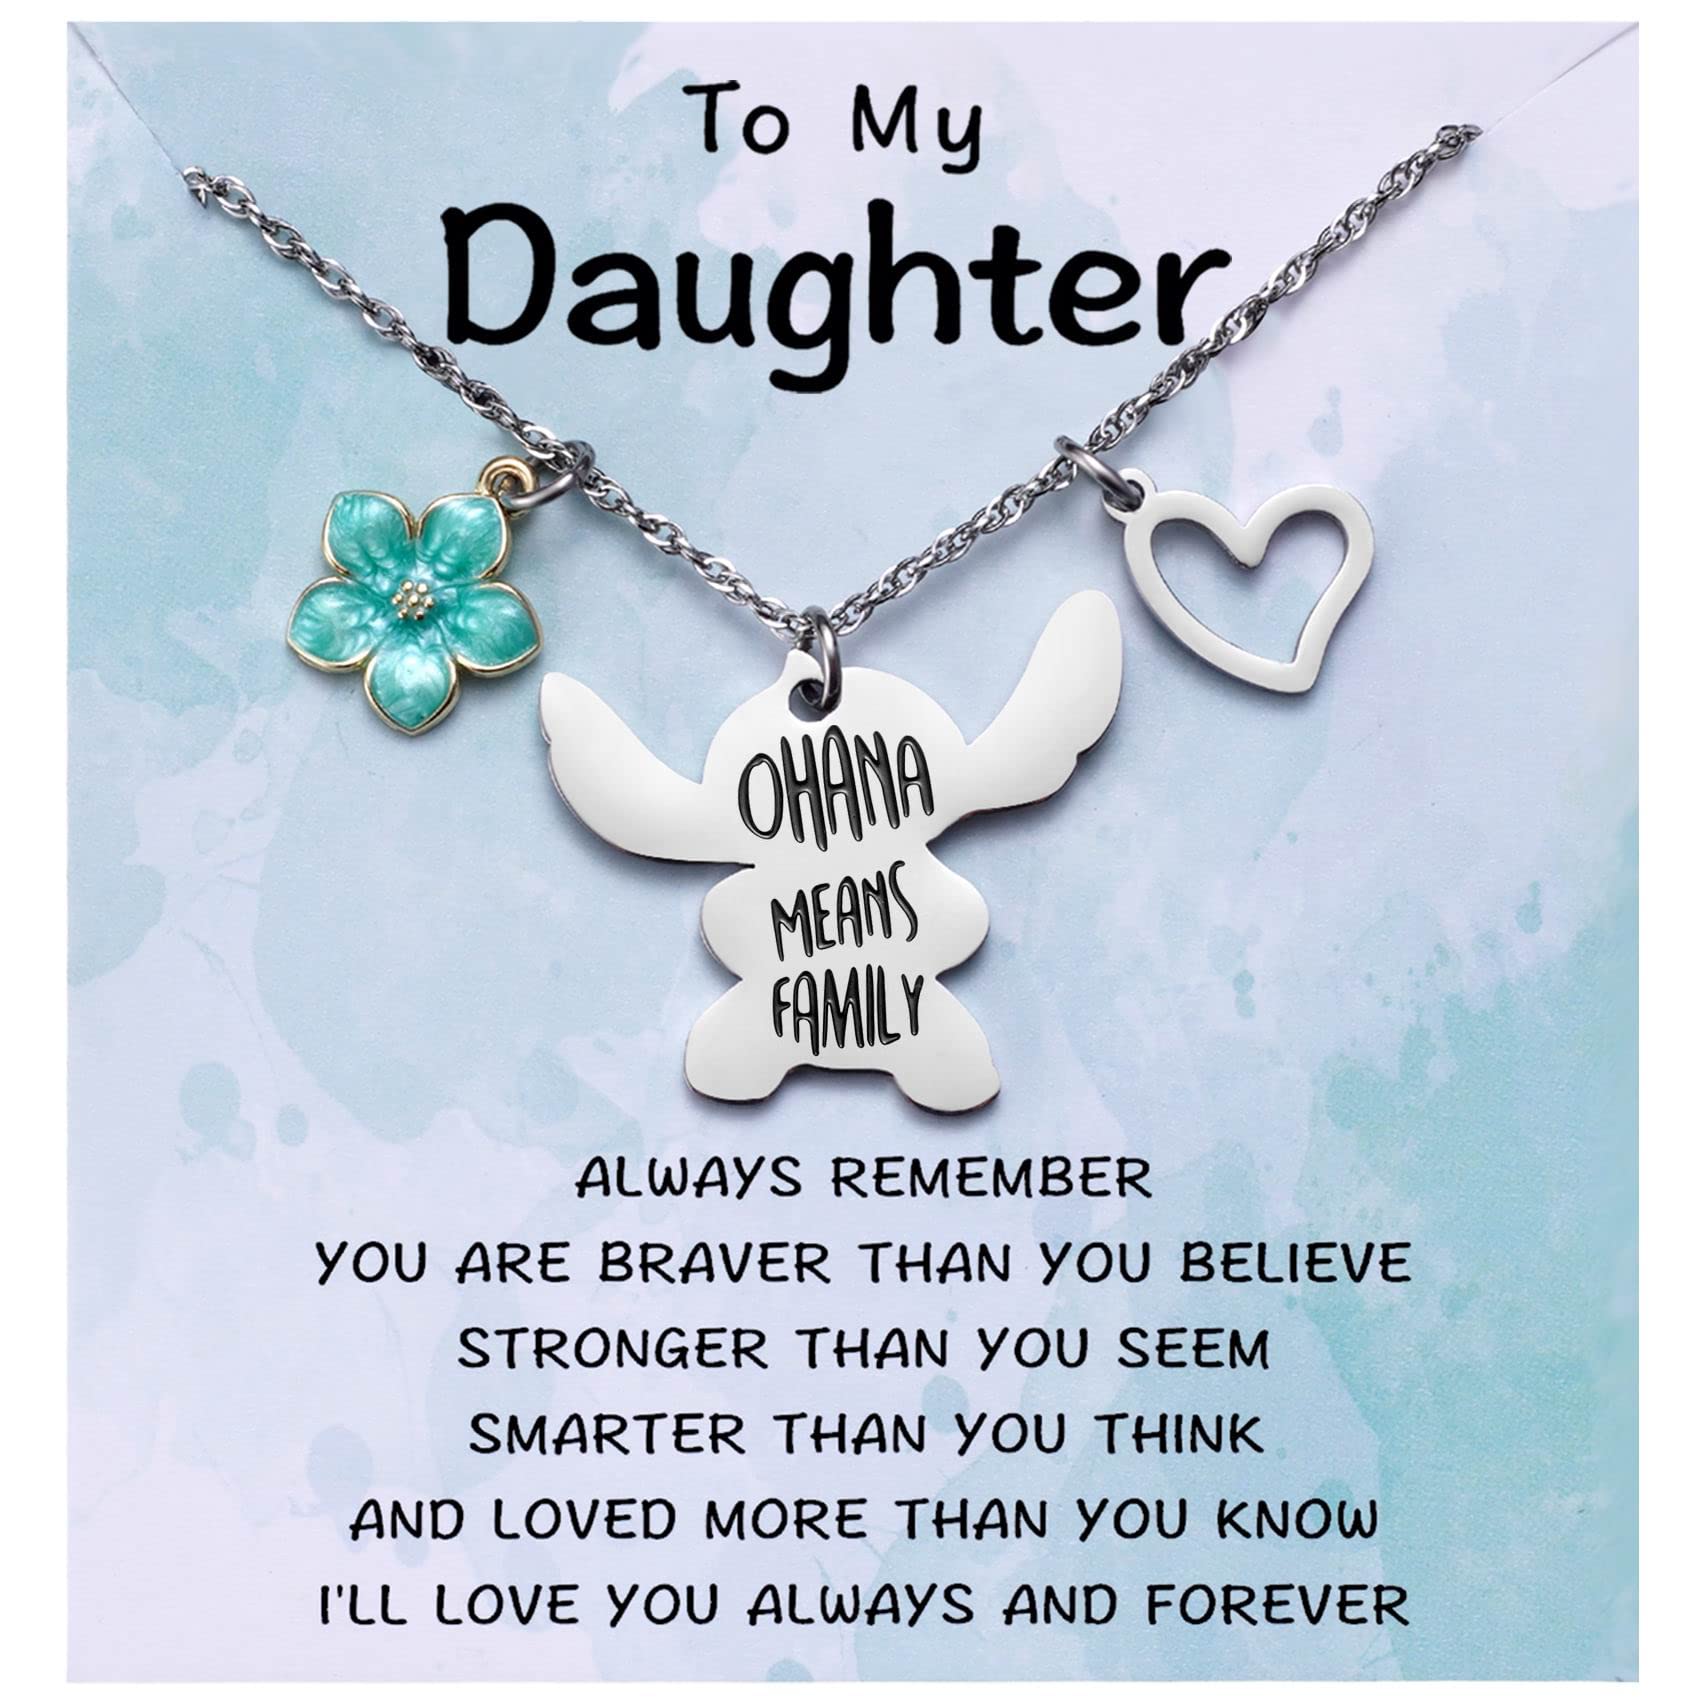 To My Young Daughter Stitch Gift Ohana Means Family Necklace&Message Card for Little Lilo Stitch Lover Daughter from Mom Dad, Stitch Jewelry Birthday Graduation Christmas Gifts for Teen Girls